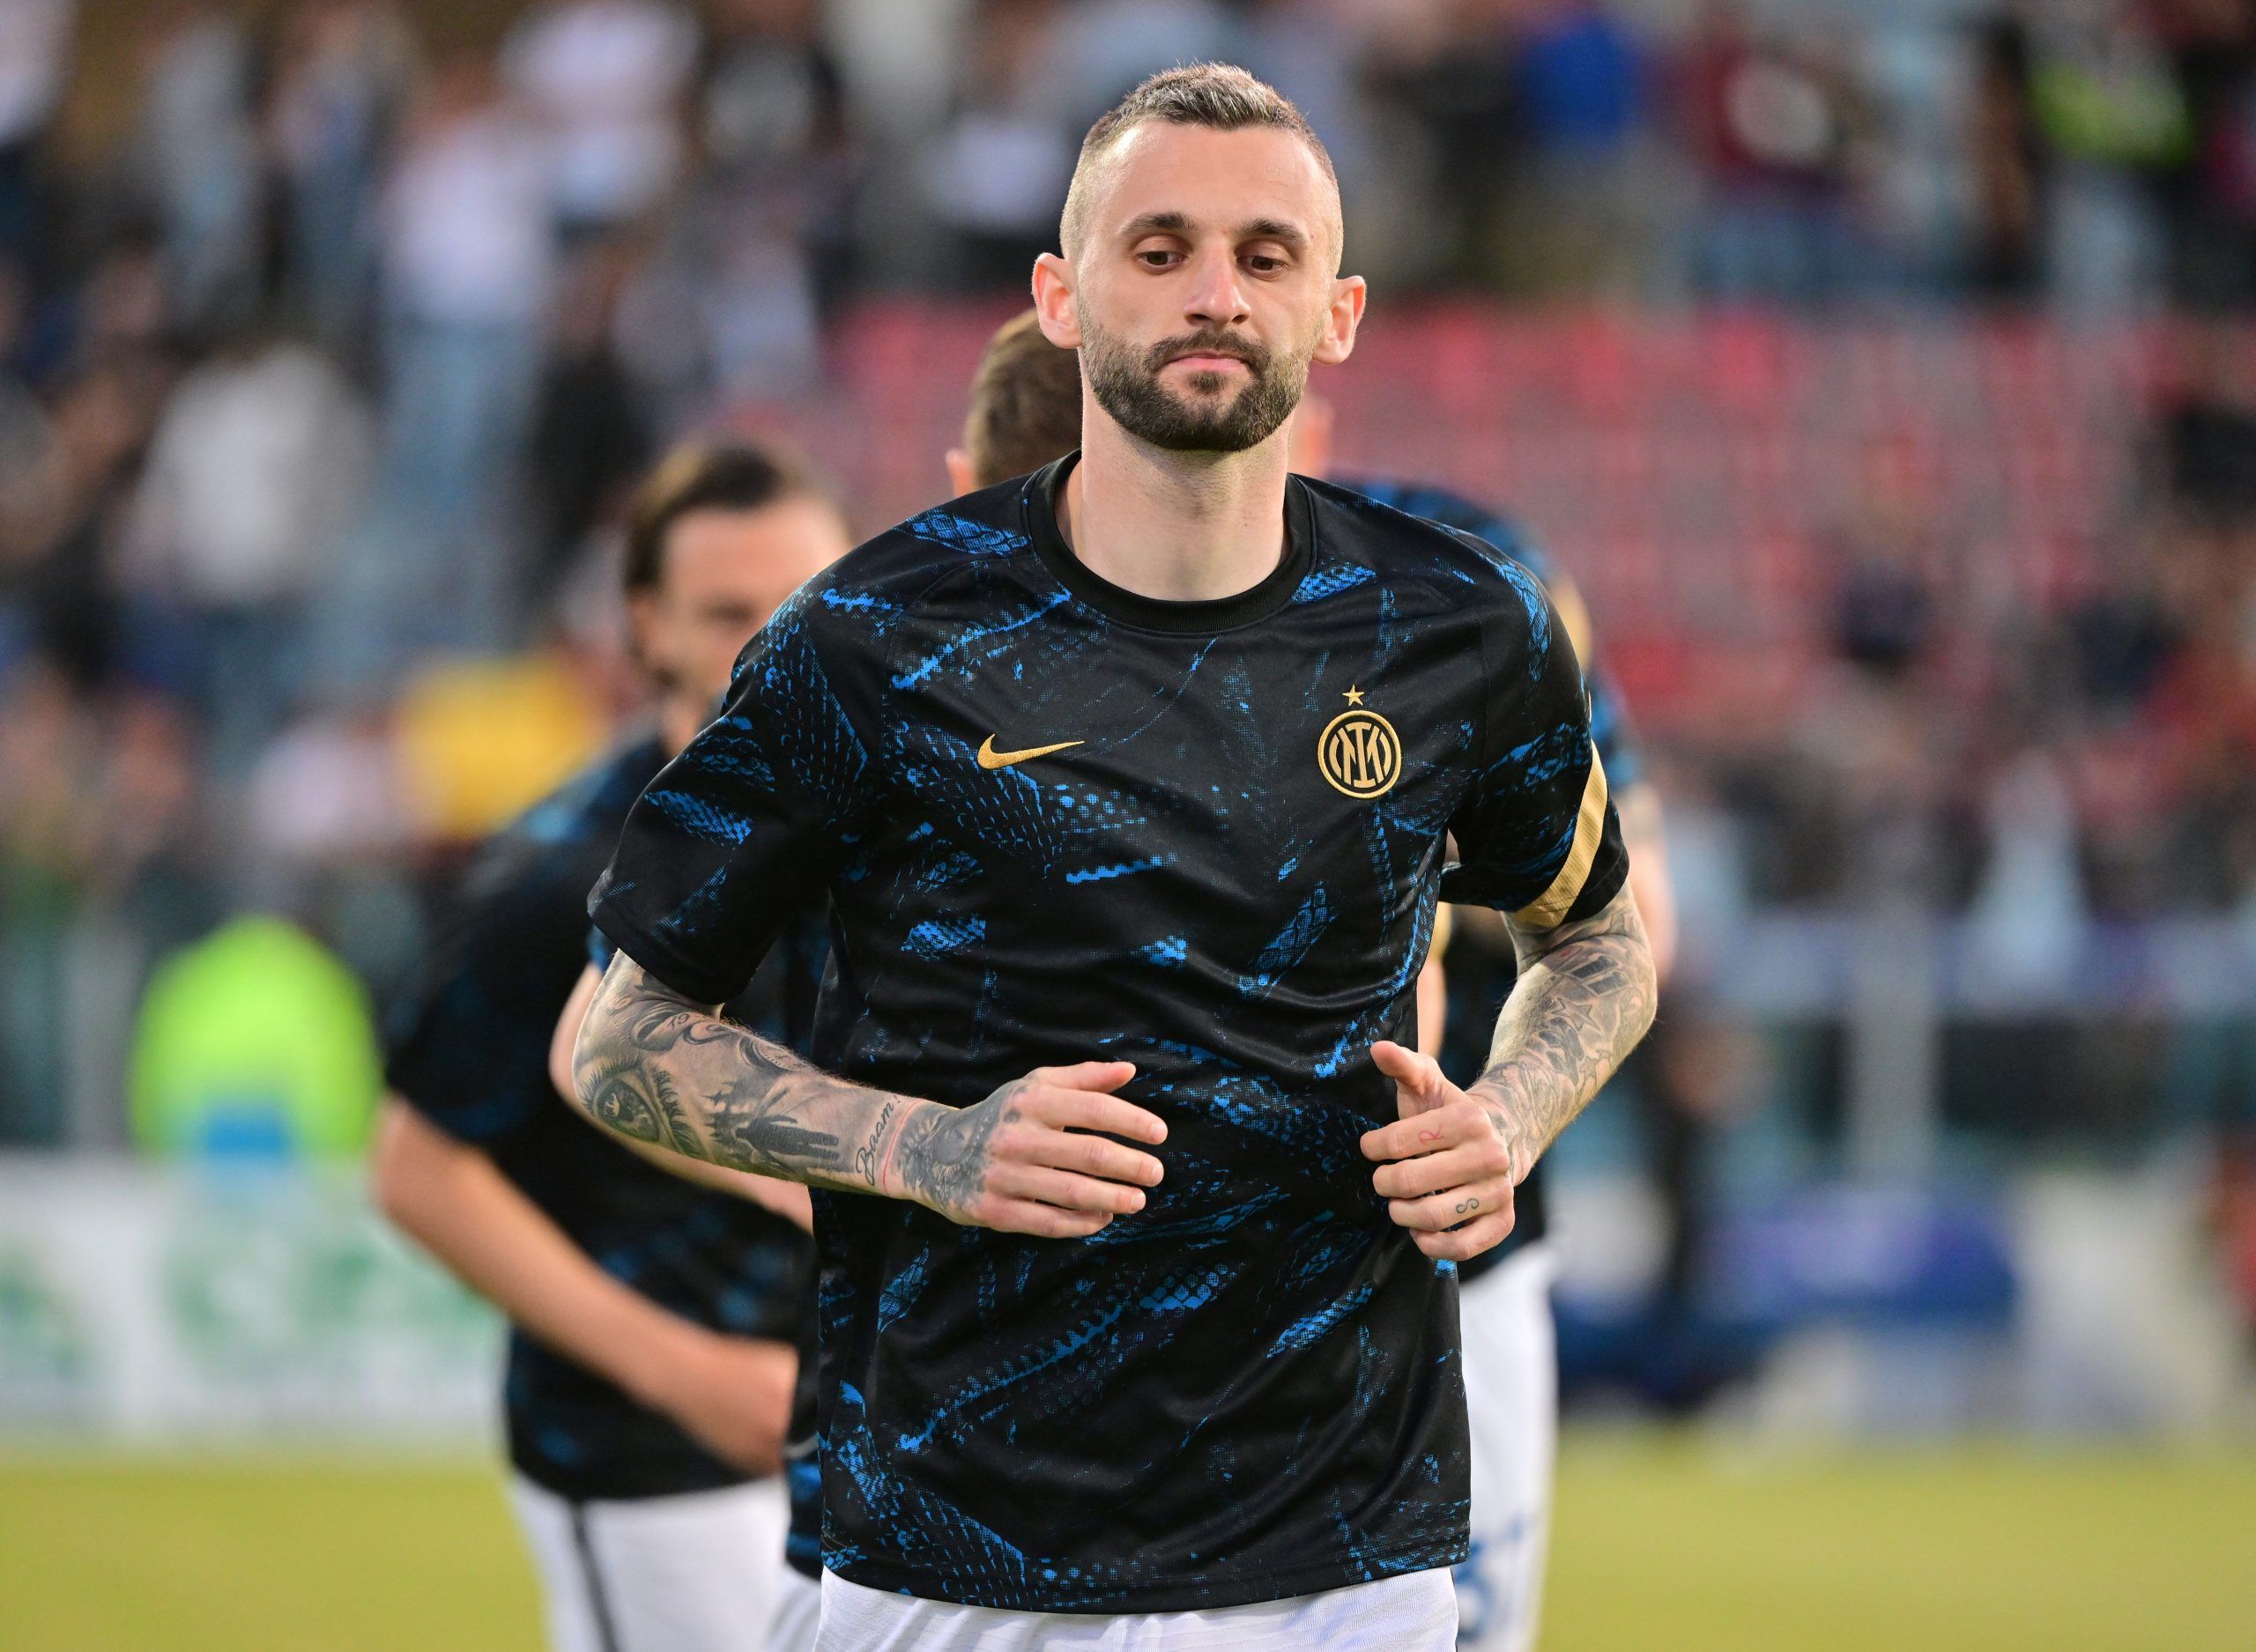 Soccer Football - Serie A - Cagliari v Inter Milan - Sardegna Arena, Cagliari, Italy - May 15, 2022  Inter Milan's Marcelo Brozovic during the warm up before the match REUTERS/Alberto Lingria